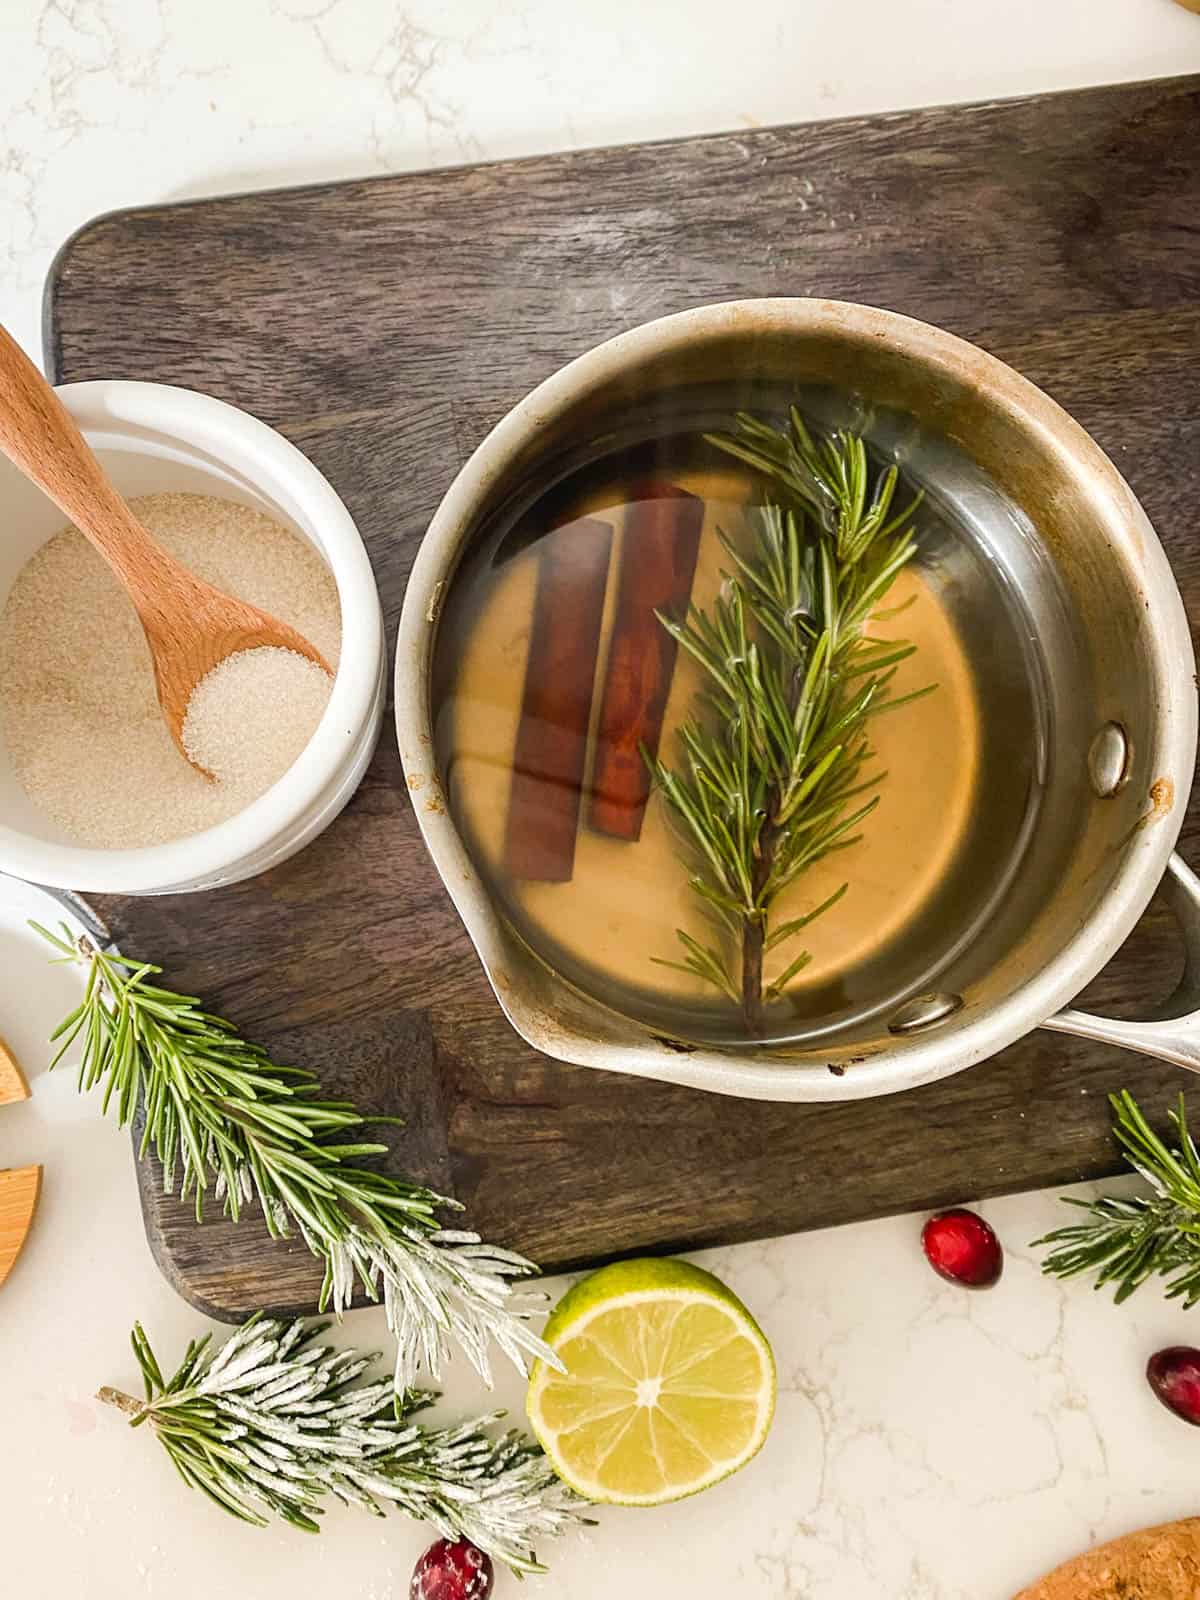 A saucepan with cinnamon sticks and rosemary to make a simple syrup.